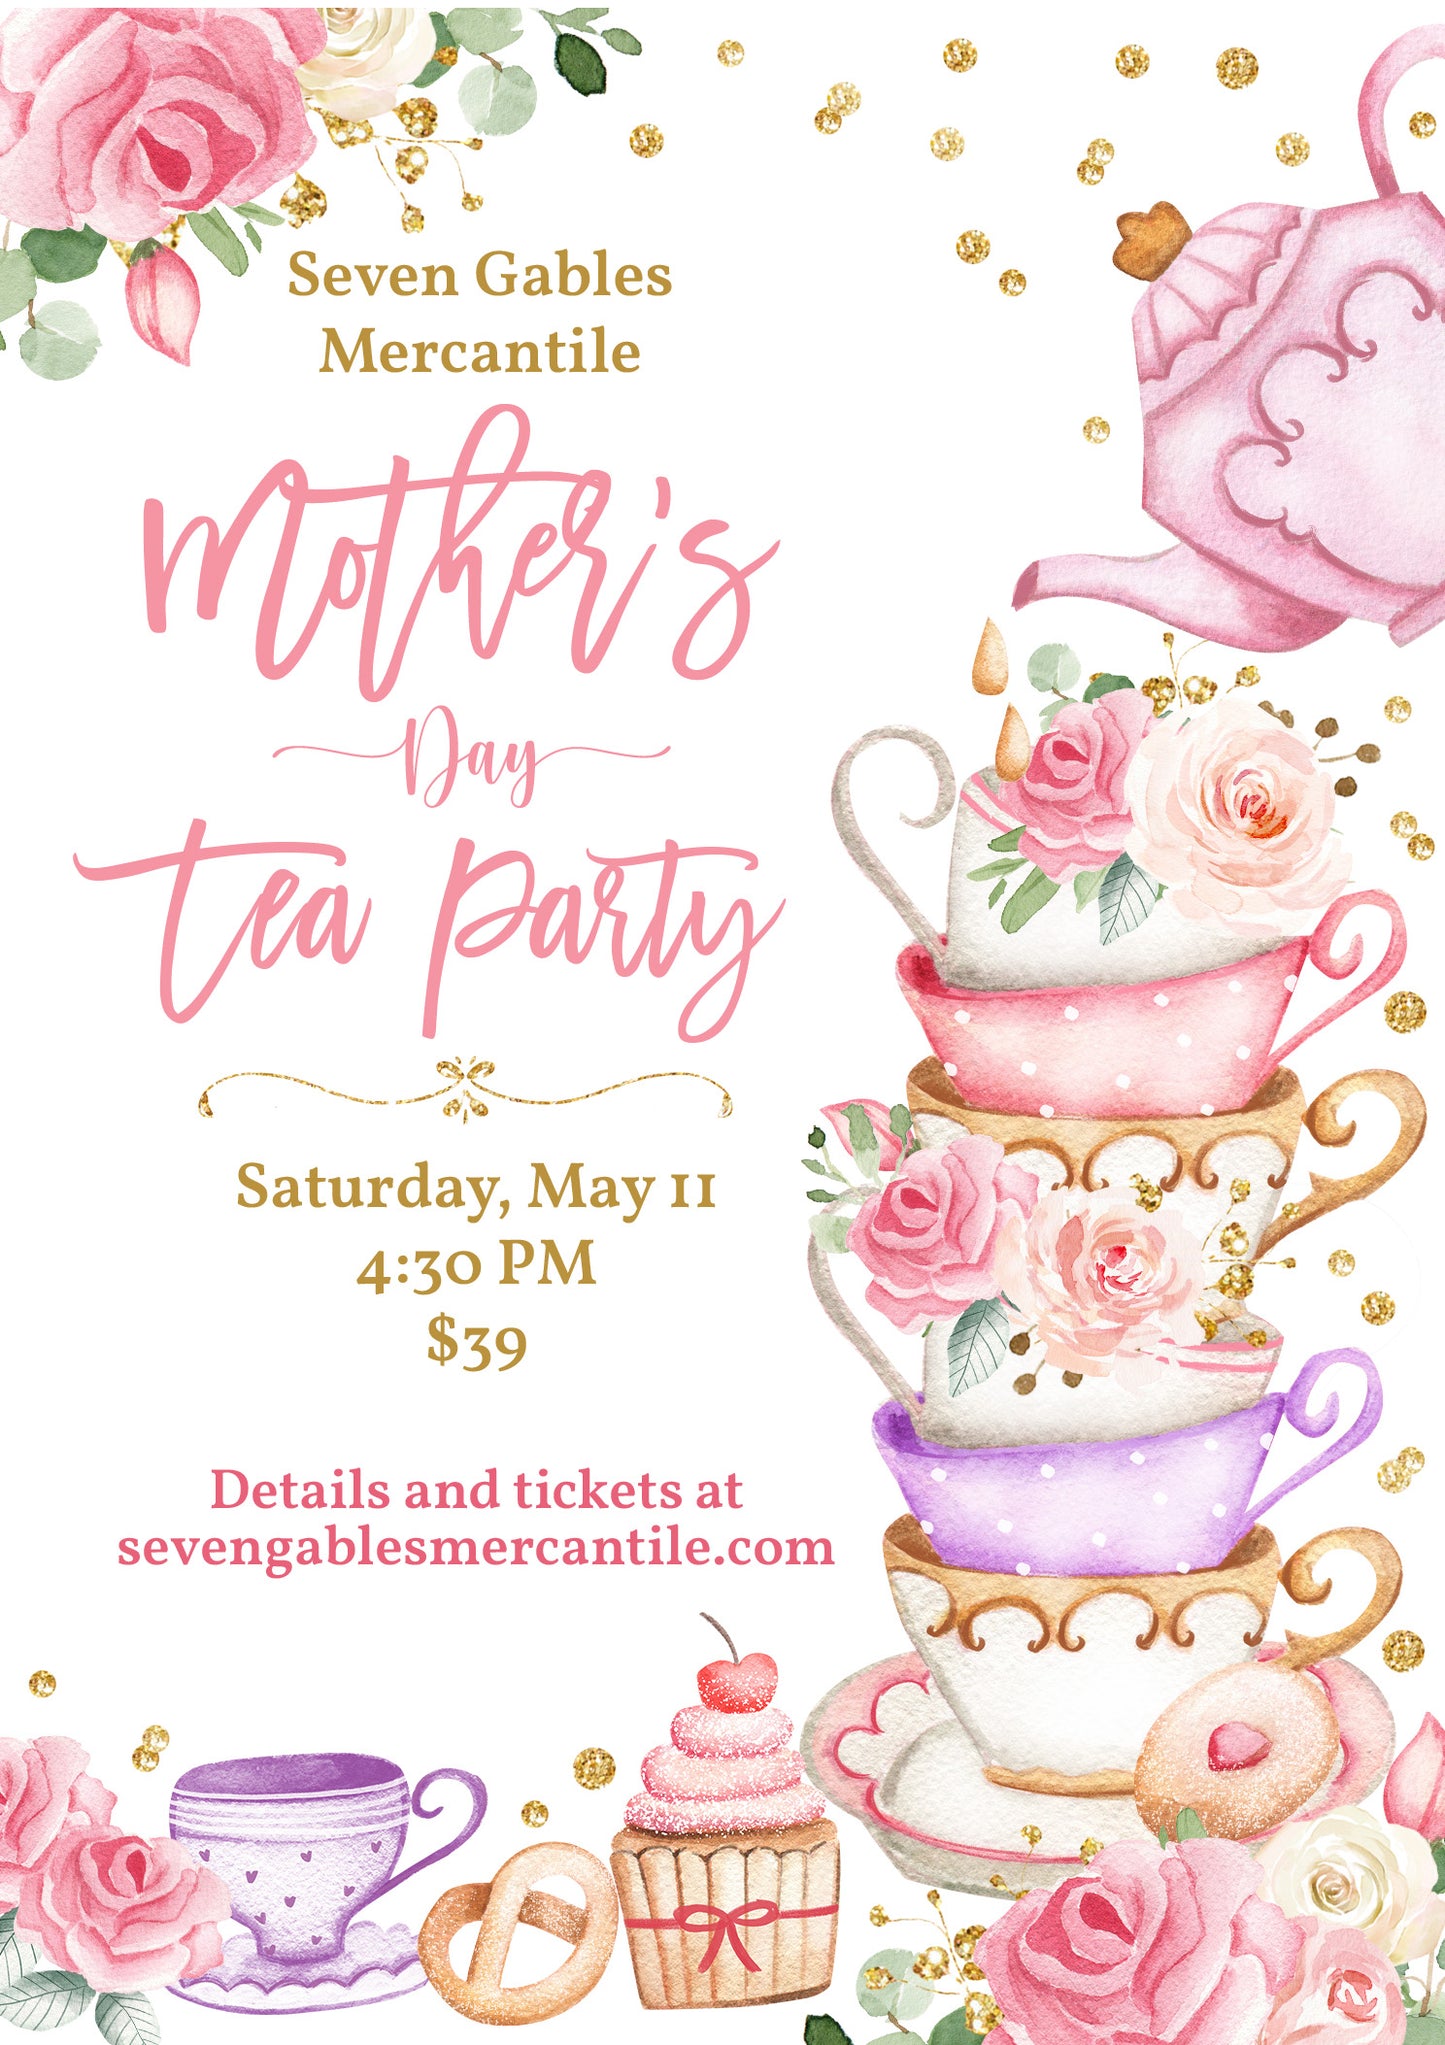 Mother's Day Tea Party 5/11